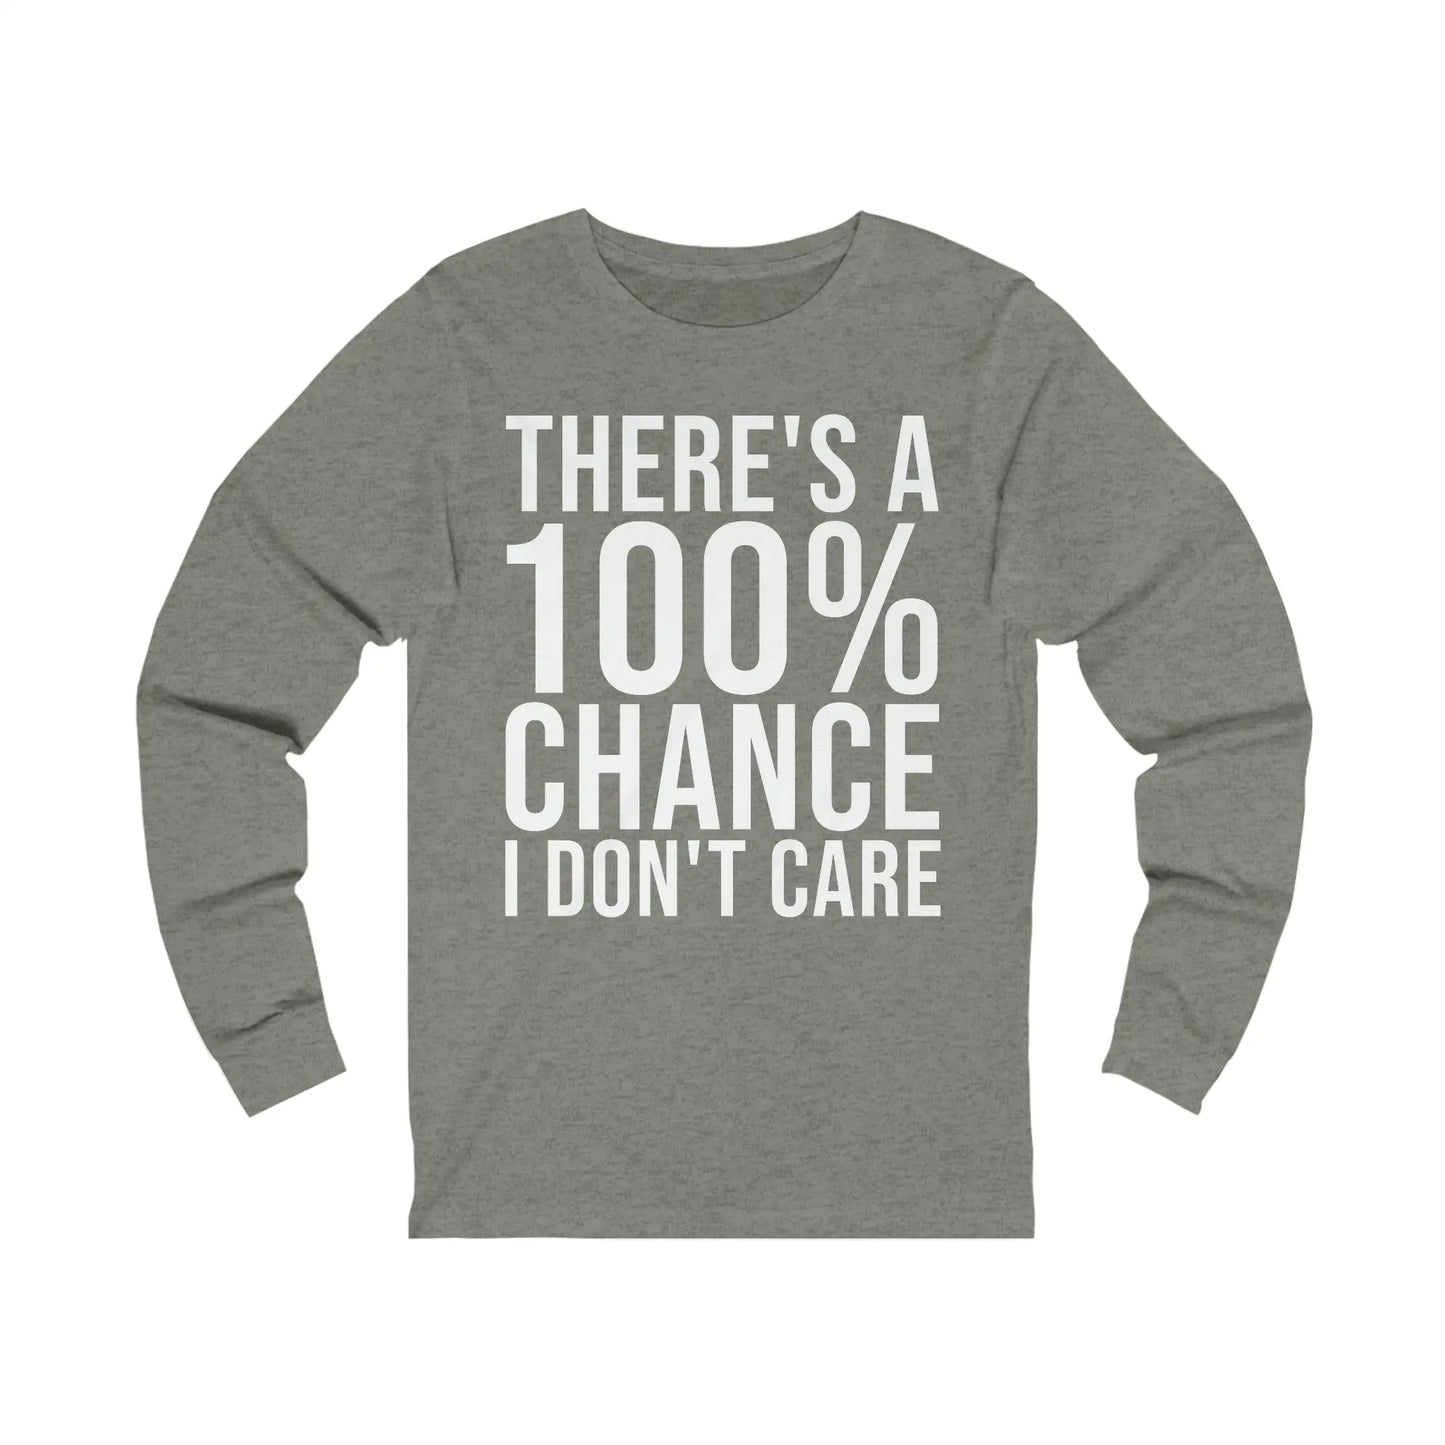 There's A 100% Chance Men's Long Sleeve Tee - Wicked Tees